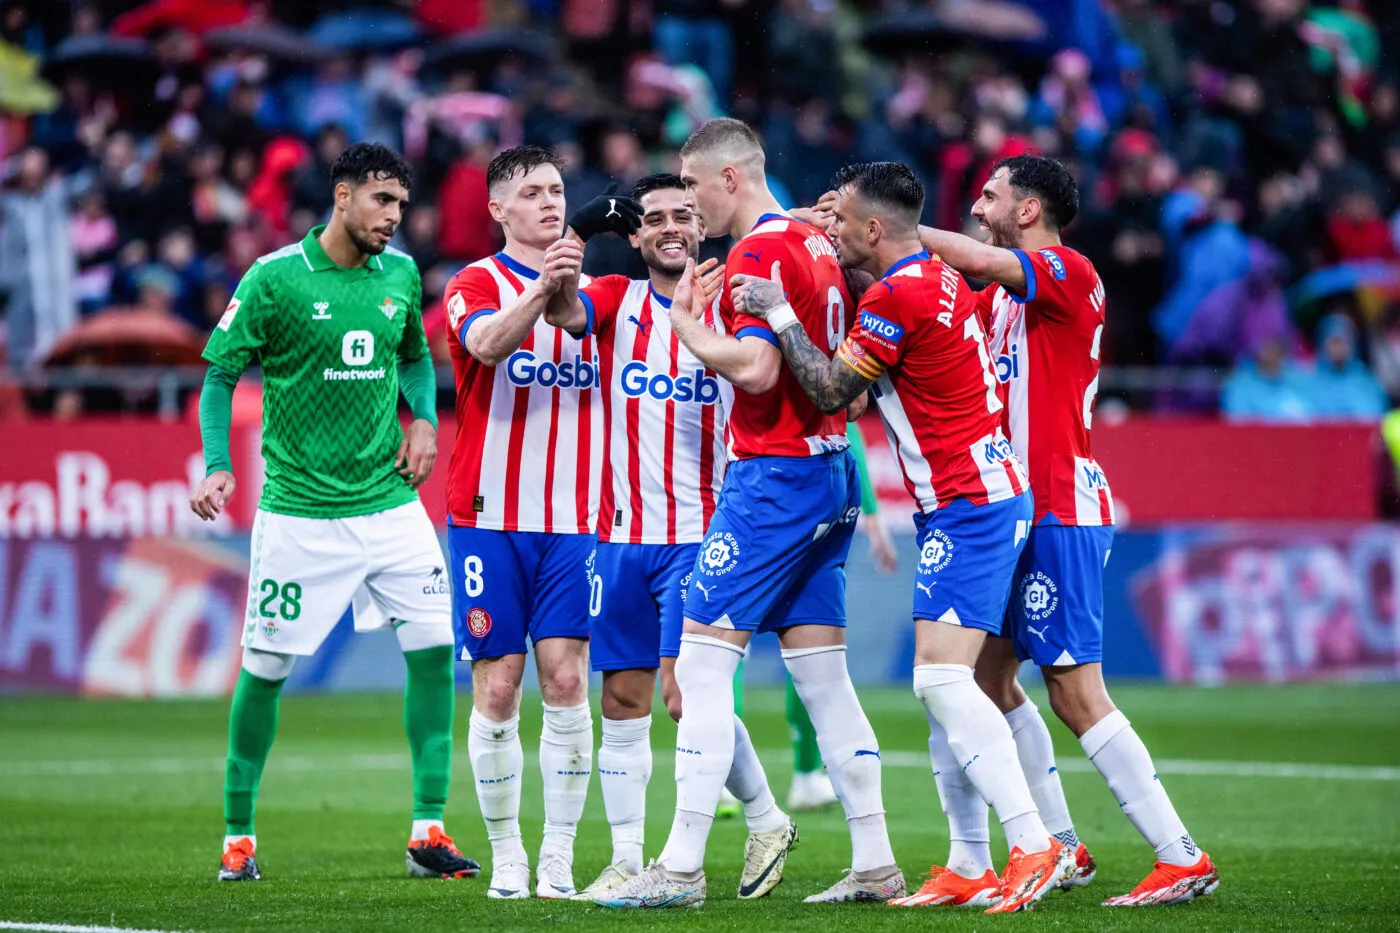 Artem Dovbyk (R3) and his teammates of Girona F.C celebrate a goal during the LaLiga EA Sports match between Girona F.C and Real Betis at Estadi Montilivi. Final score; Girona F.C 3:2 Real Betis (Photo by Marti Segura Ramoneda / SOPA Images/Sipa USA)   - Photo by Icon Sport